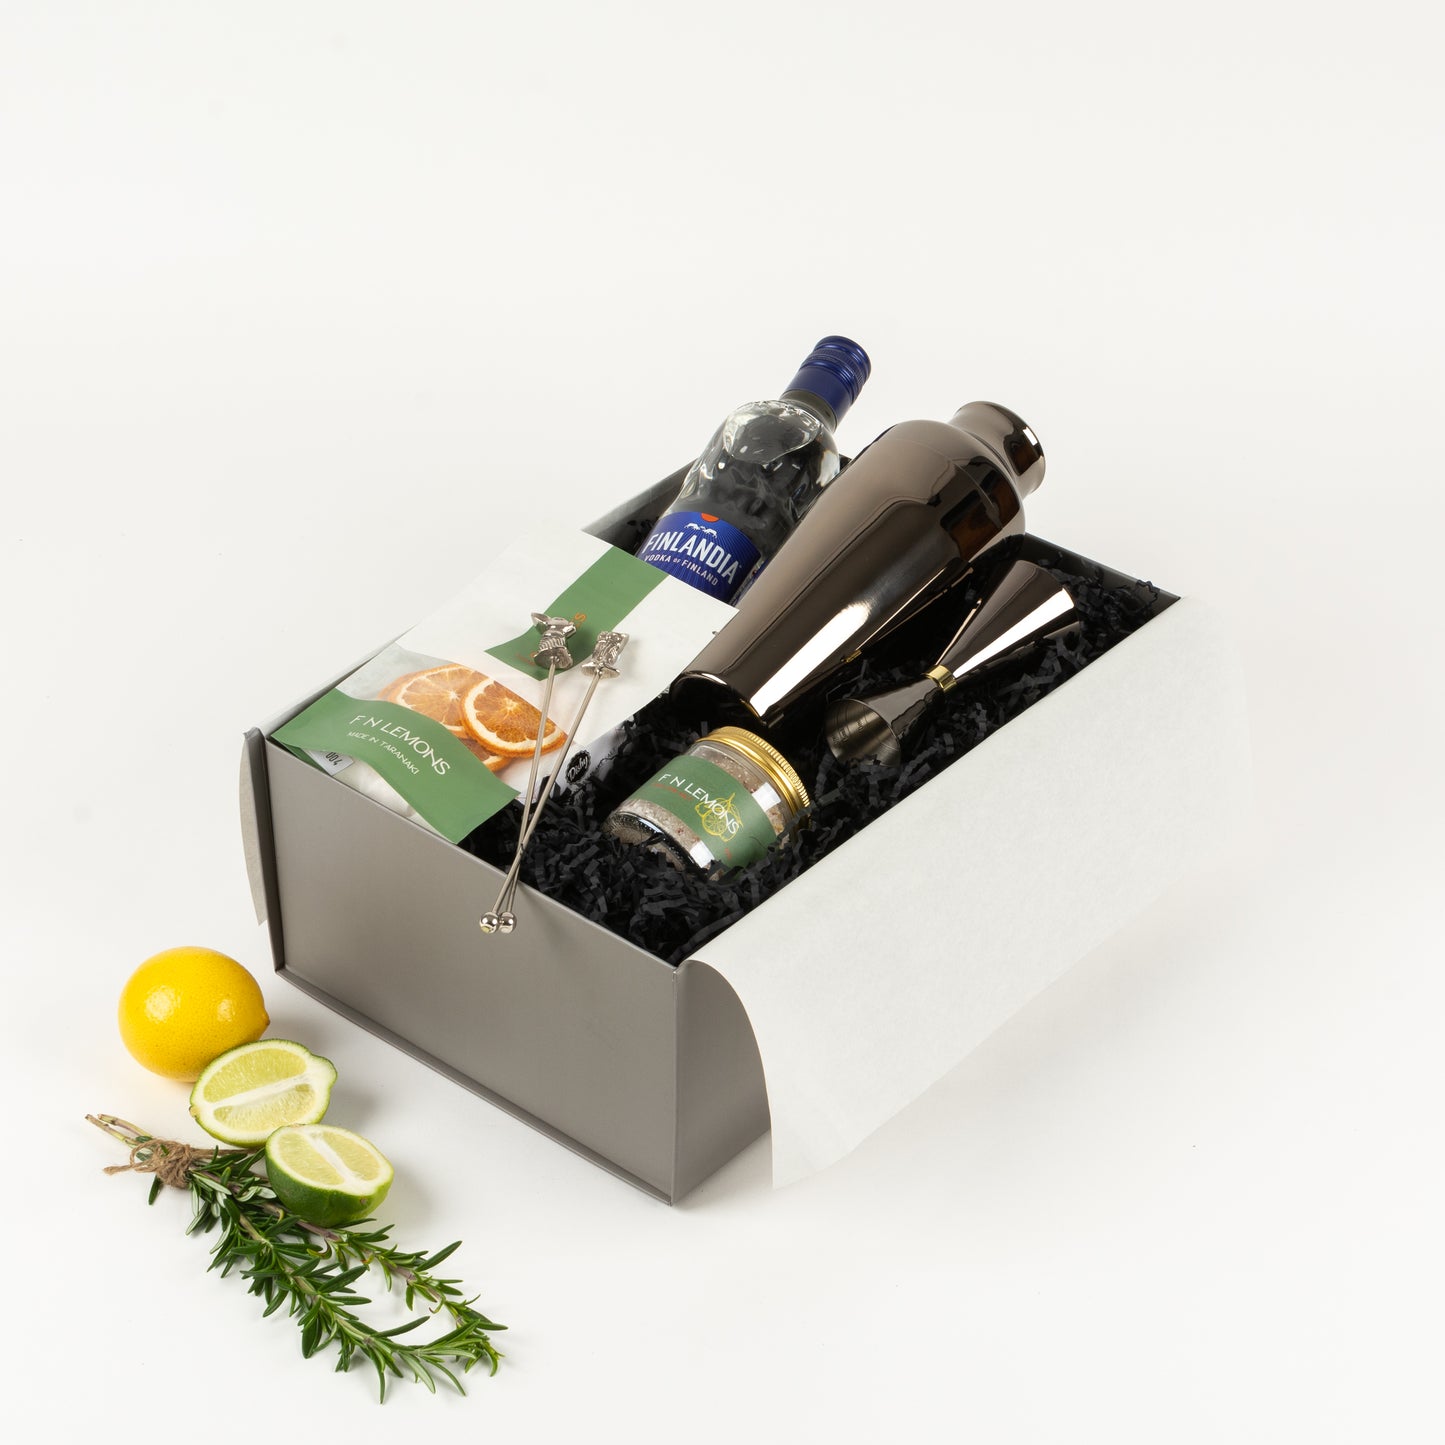 Barcart Basics - Gift Boxes NZ - Gifts of Distinction. Gift box features cocktail shaker and jigger.  Vodka, cocktail garnishes and swizzle sticks.